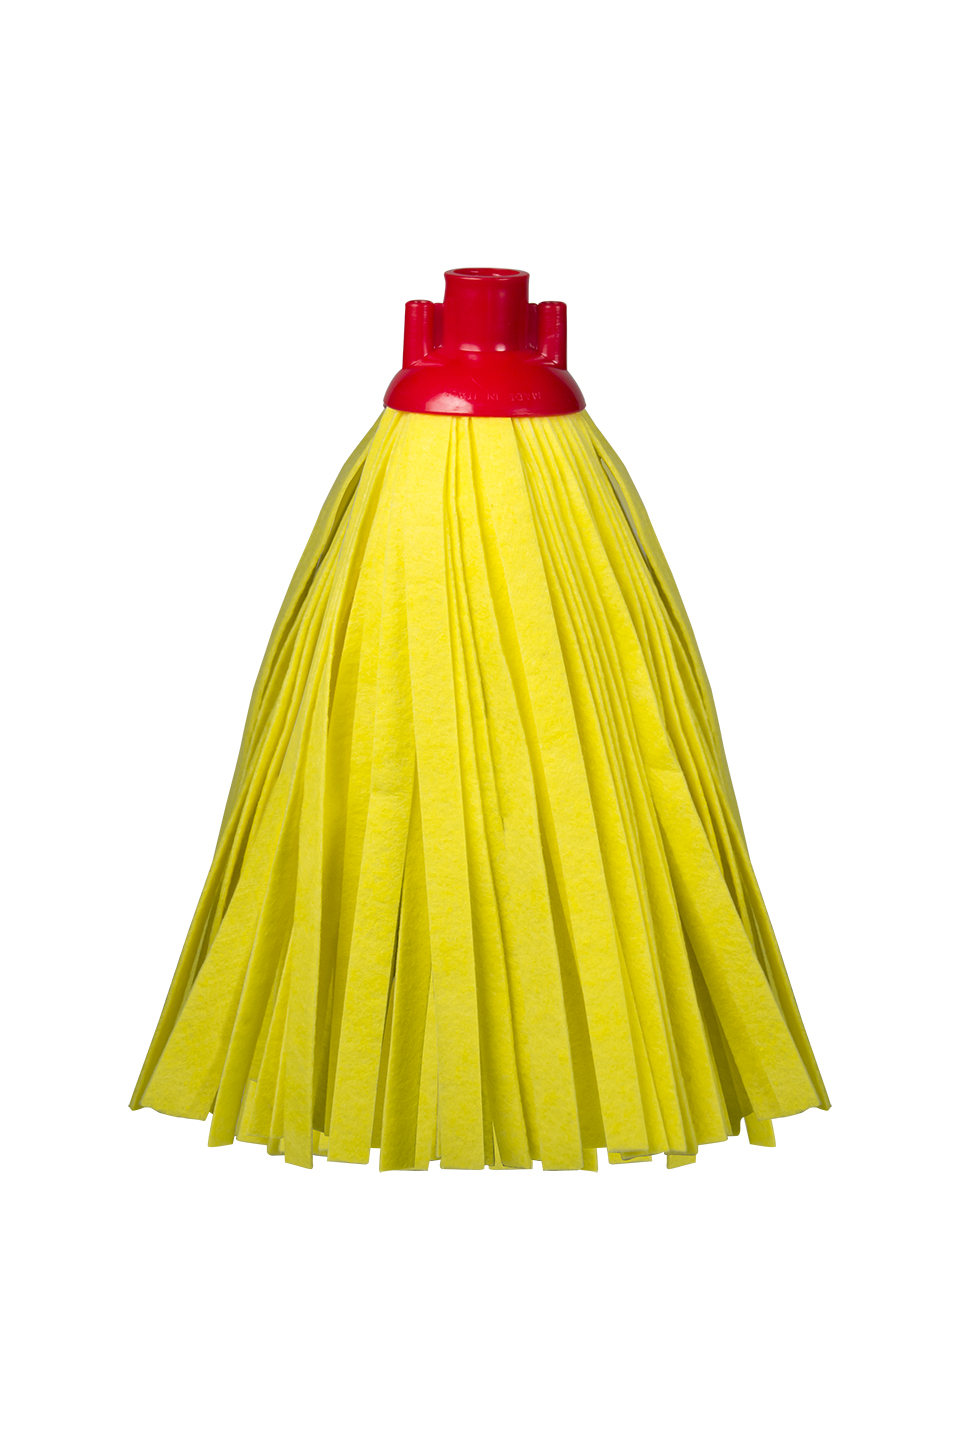 Synthetic mop 40 stripes 21 cm. tissue yellow color